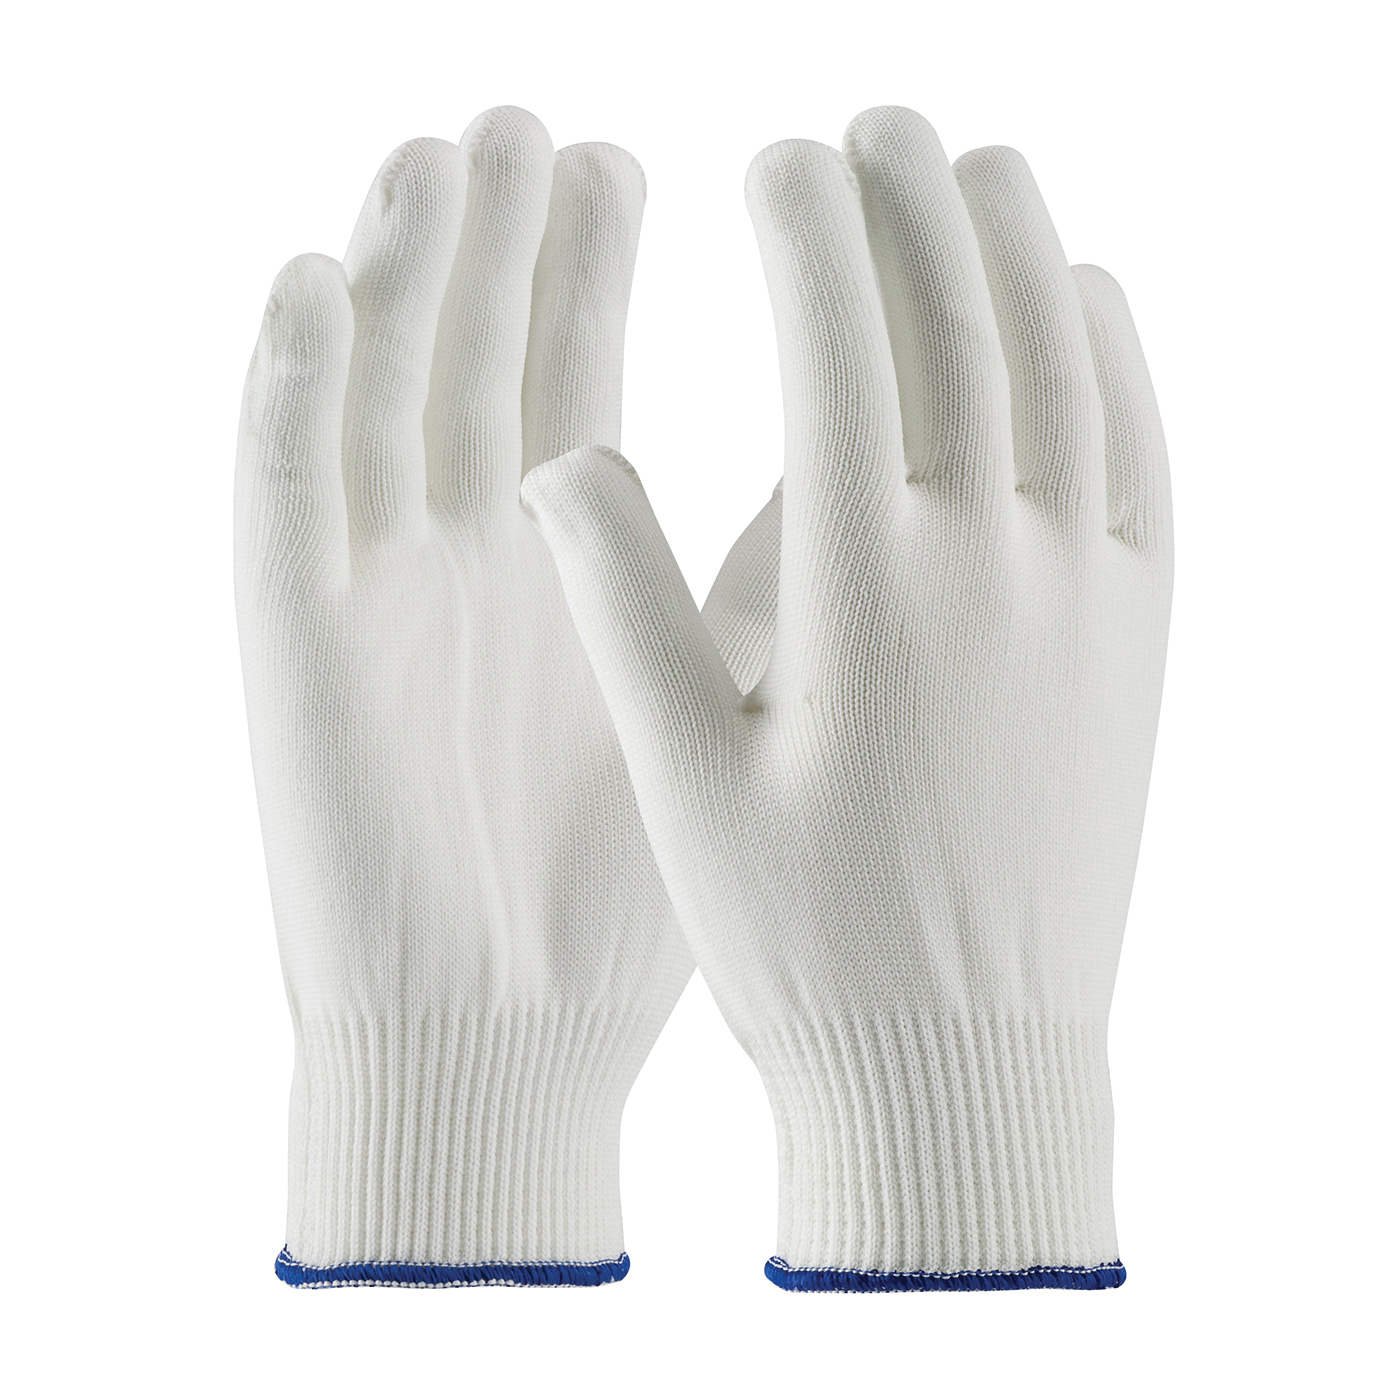 PIP® CleanTeam® 40-230S Lightweight General Purpose Gloves, Clean Environment, S, Polyester Palm, 13 ga Polyester, White, Knit Wrist Cuff, Uncoated Coating, Resists: Abrasion and Cut, Polyester Lining, Seamless Knit